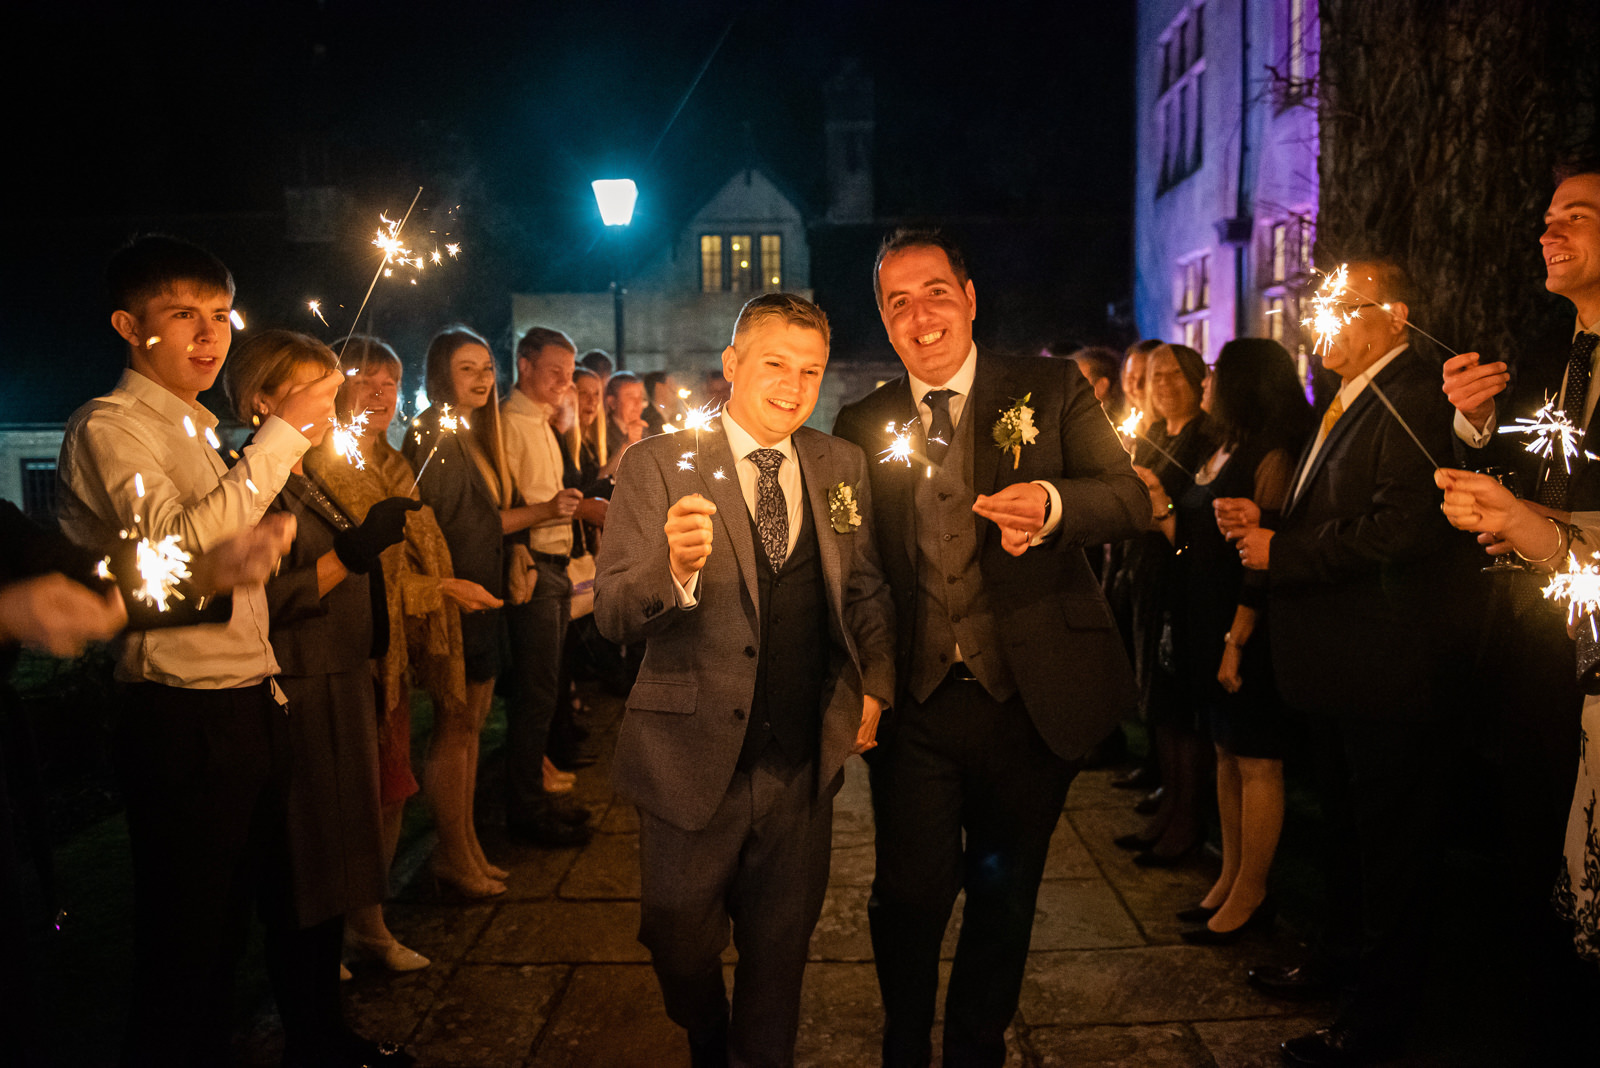 Fun sparkler shots for a same sex winter wedding at Pennyhill Park in Surrey.